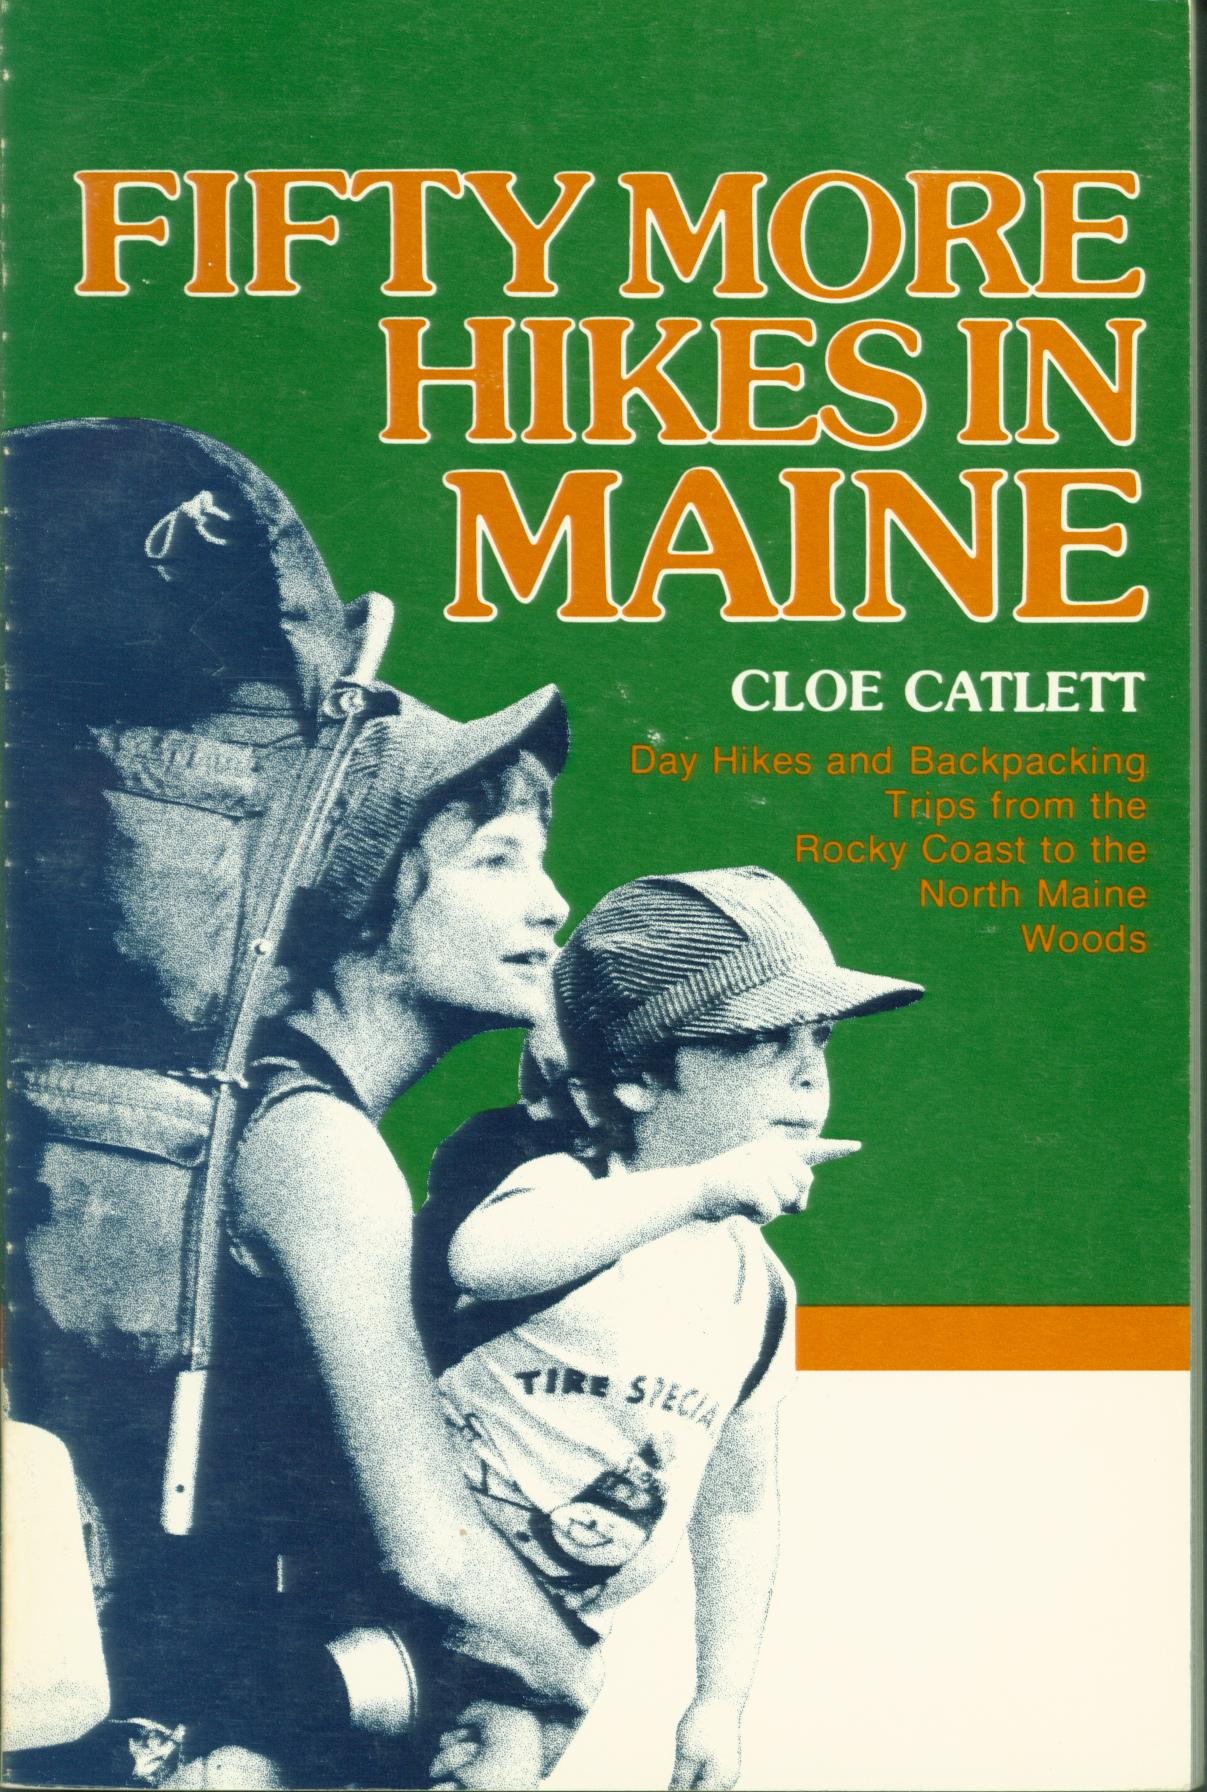 FIFTY MORE HIKES IN MAINE: day hikes and backpacking trips from the rocky coast to the north Maine woods